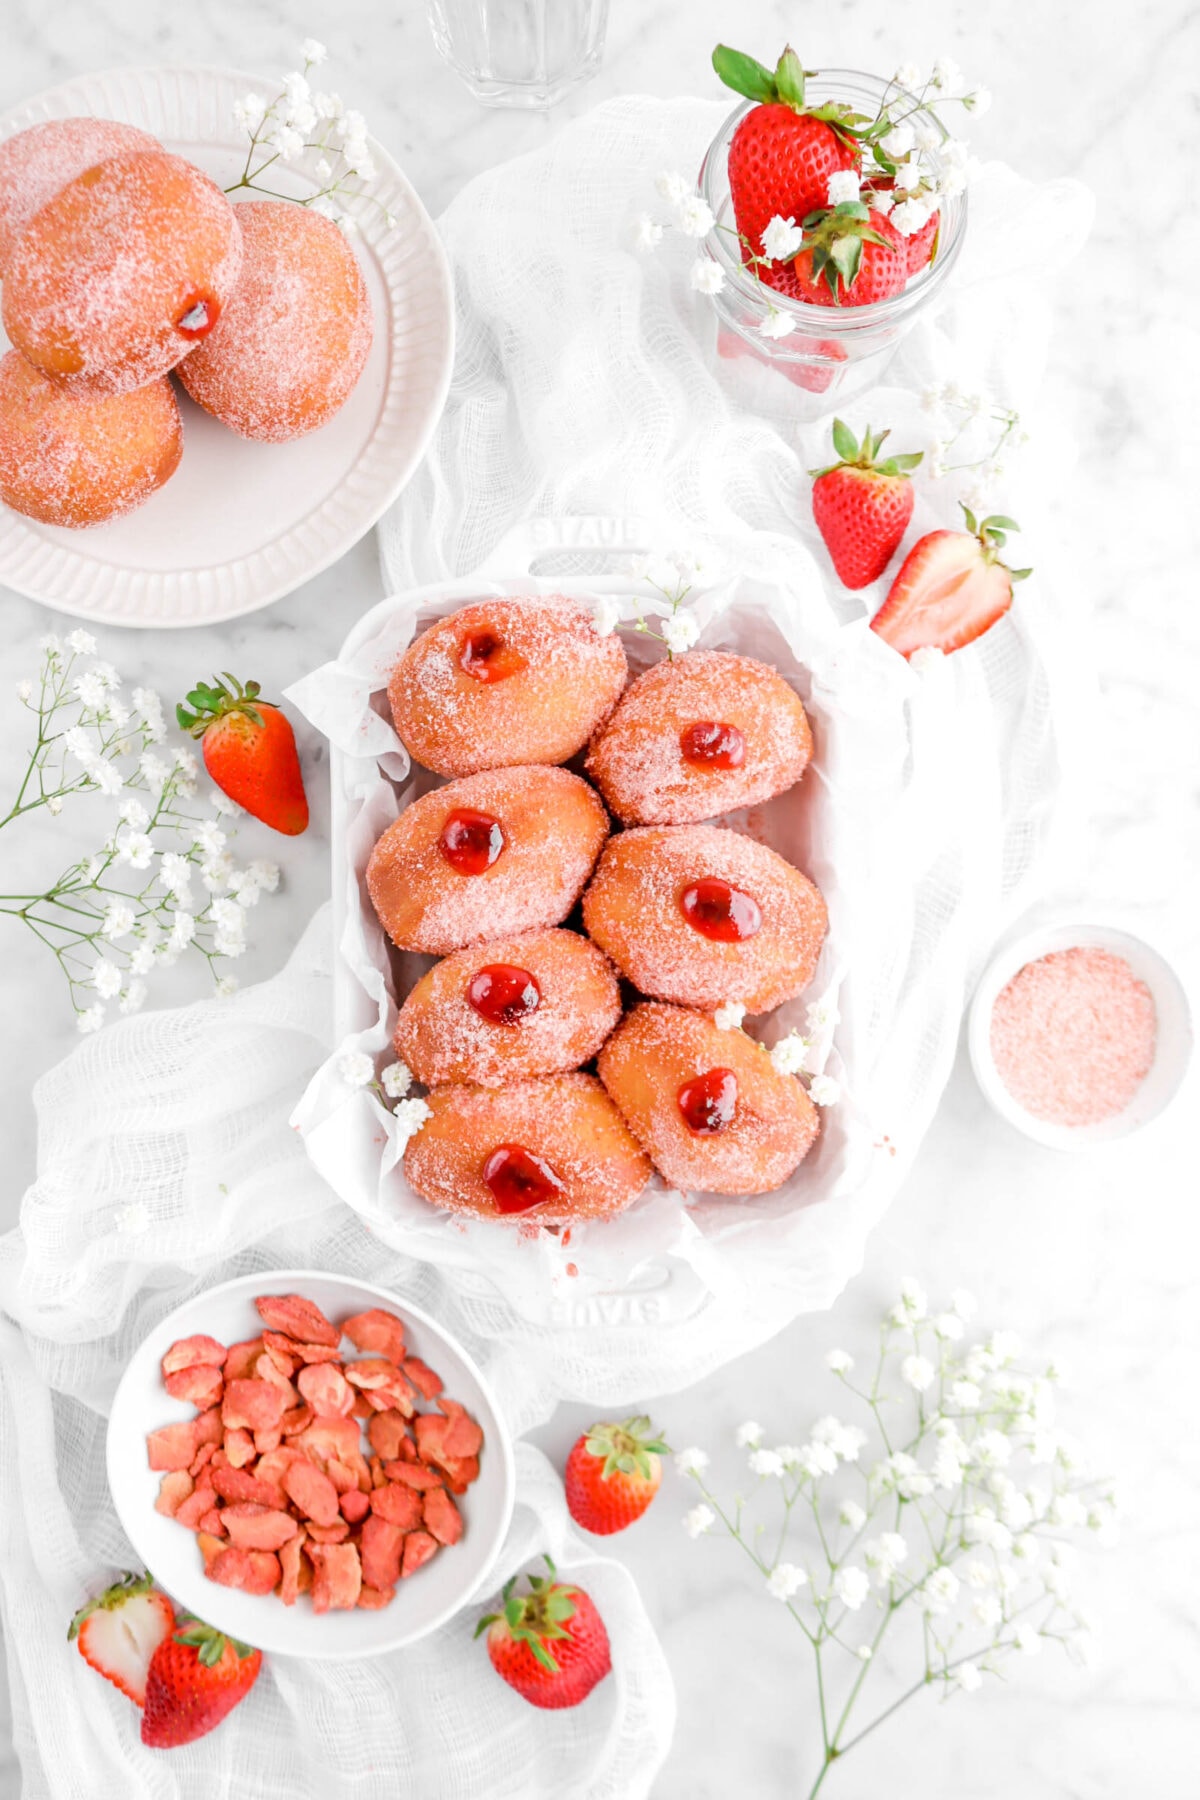 seven jam filled doughnuts in white casserole with flowers and strawberries around